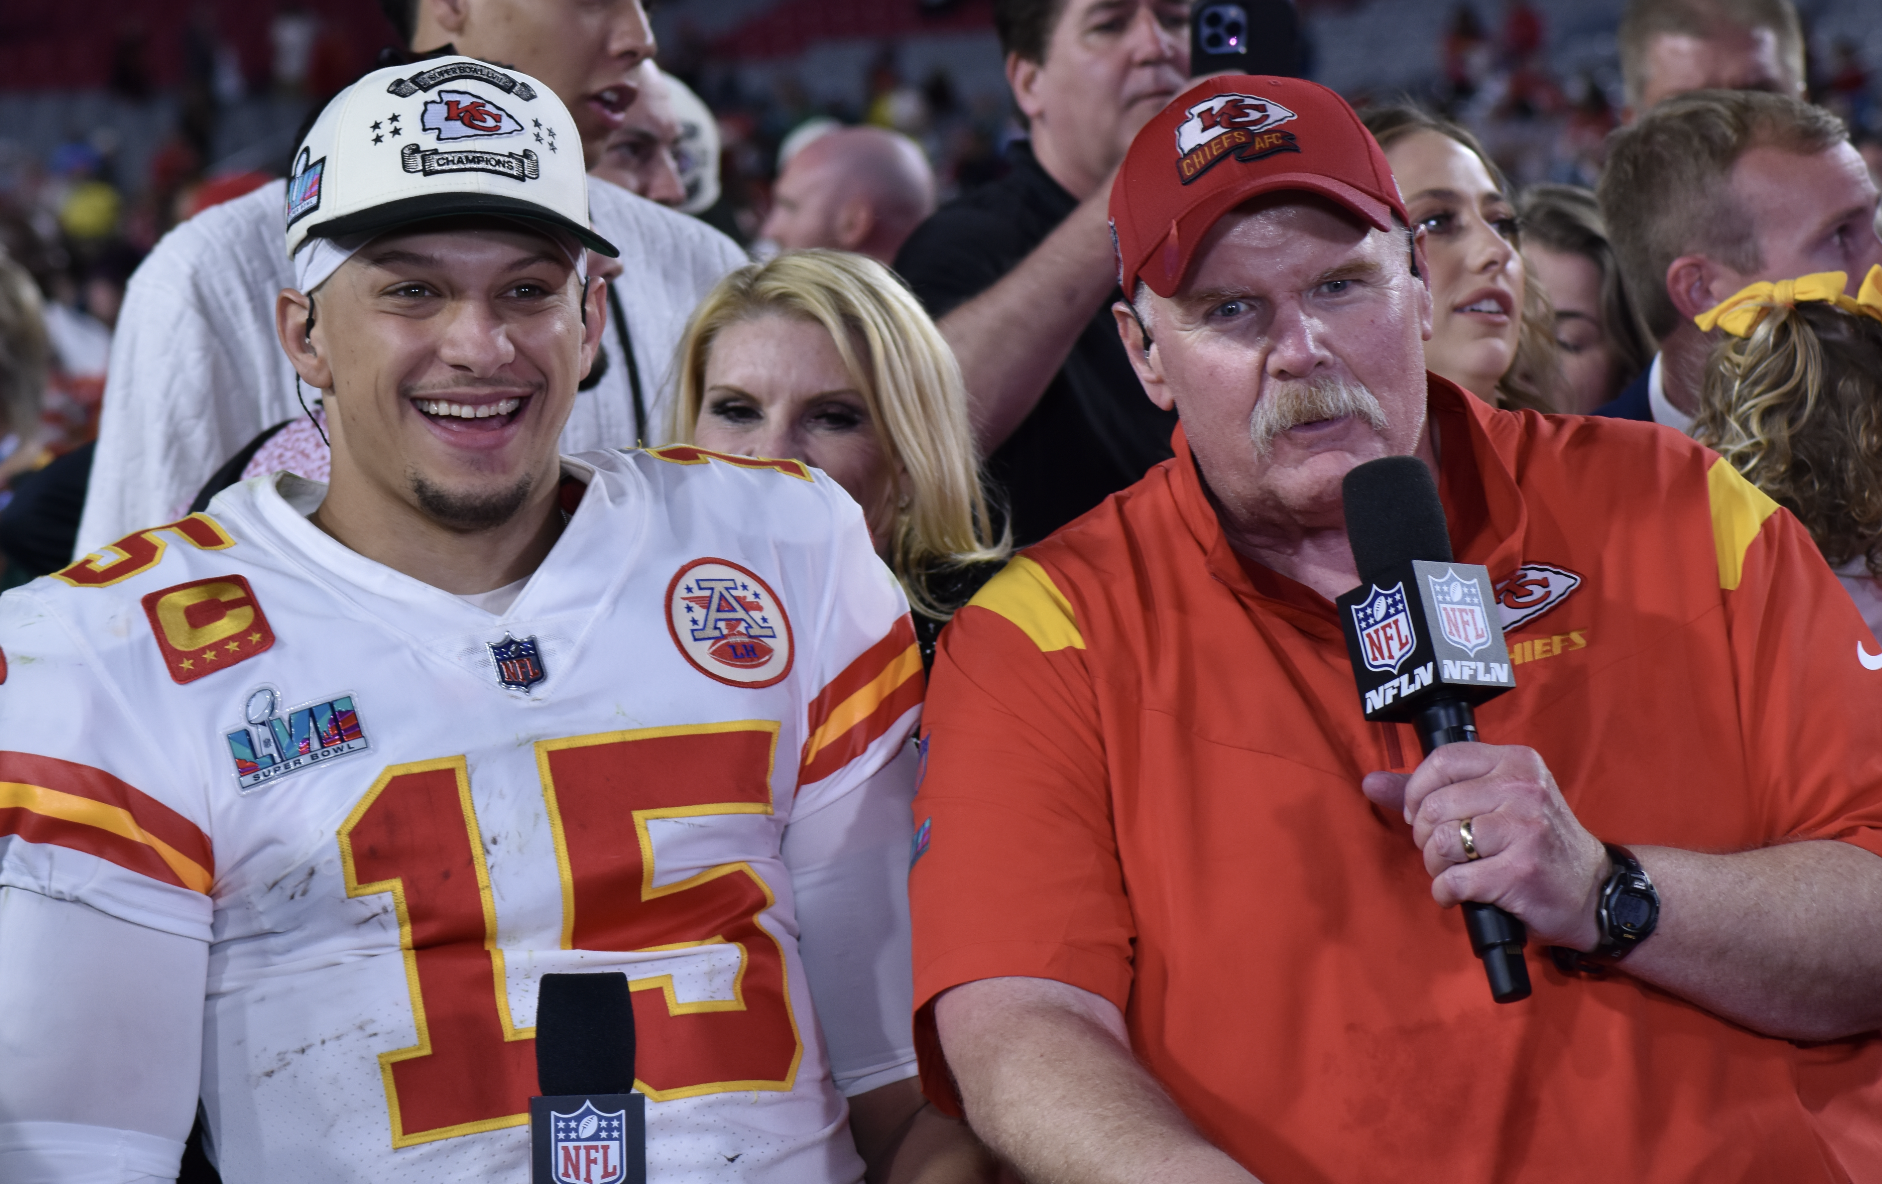 Patrick Mahomes and Andy Reid get interviewed